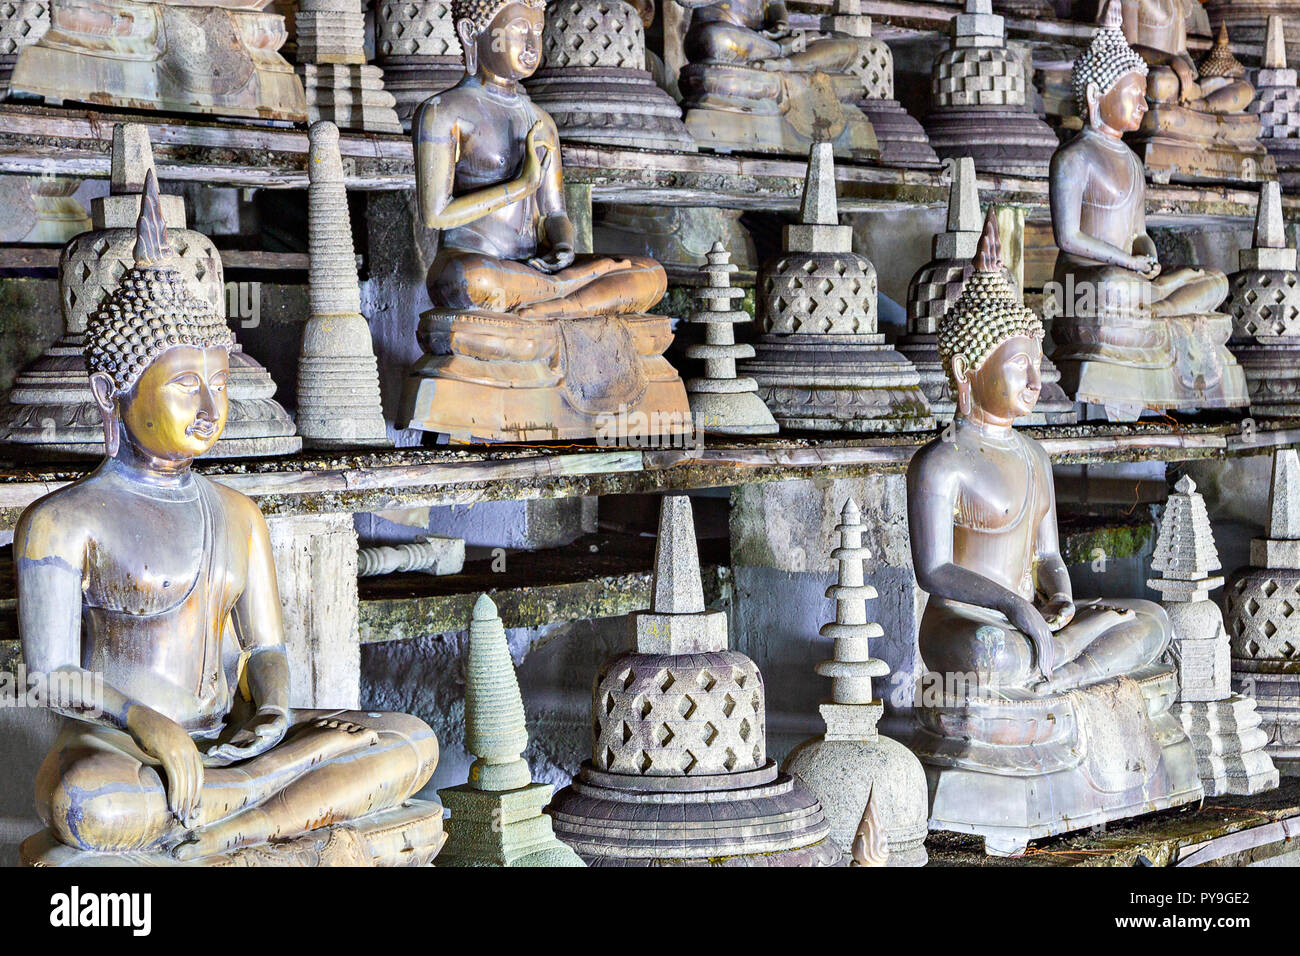 Buddha statues in lotus position and pagodas in the Temple of Gangaramaya in Colombo, Sri Lanka. Stock Photo